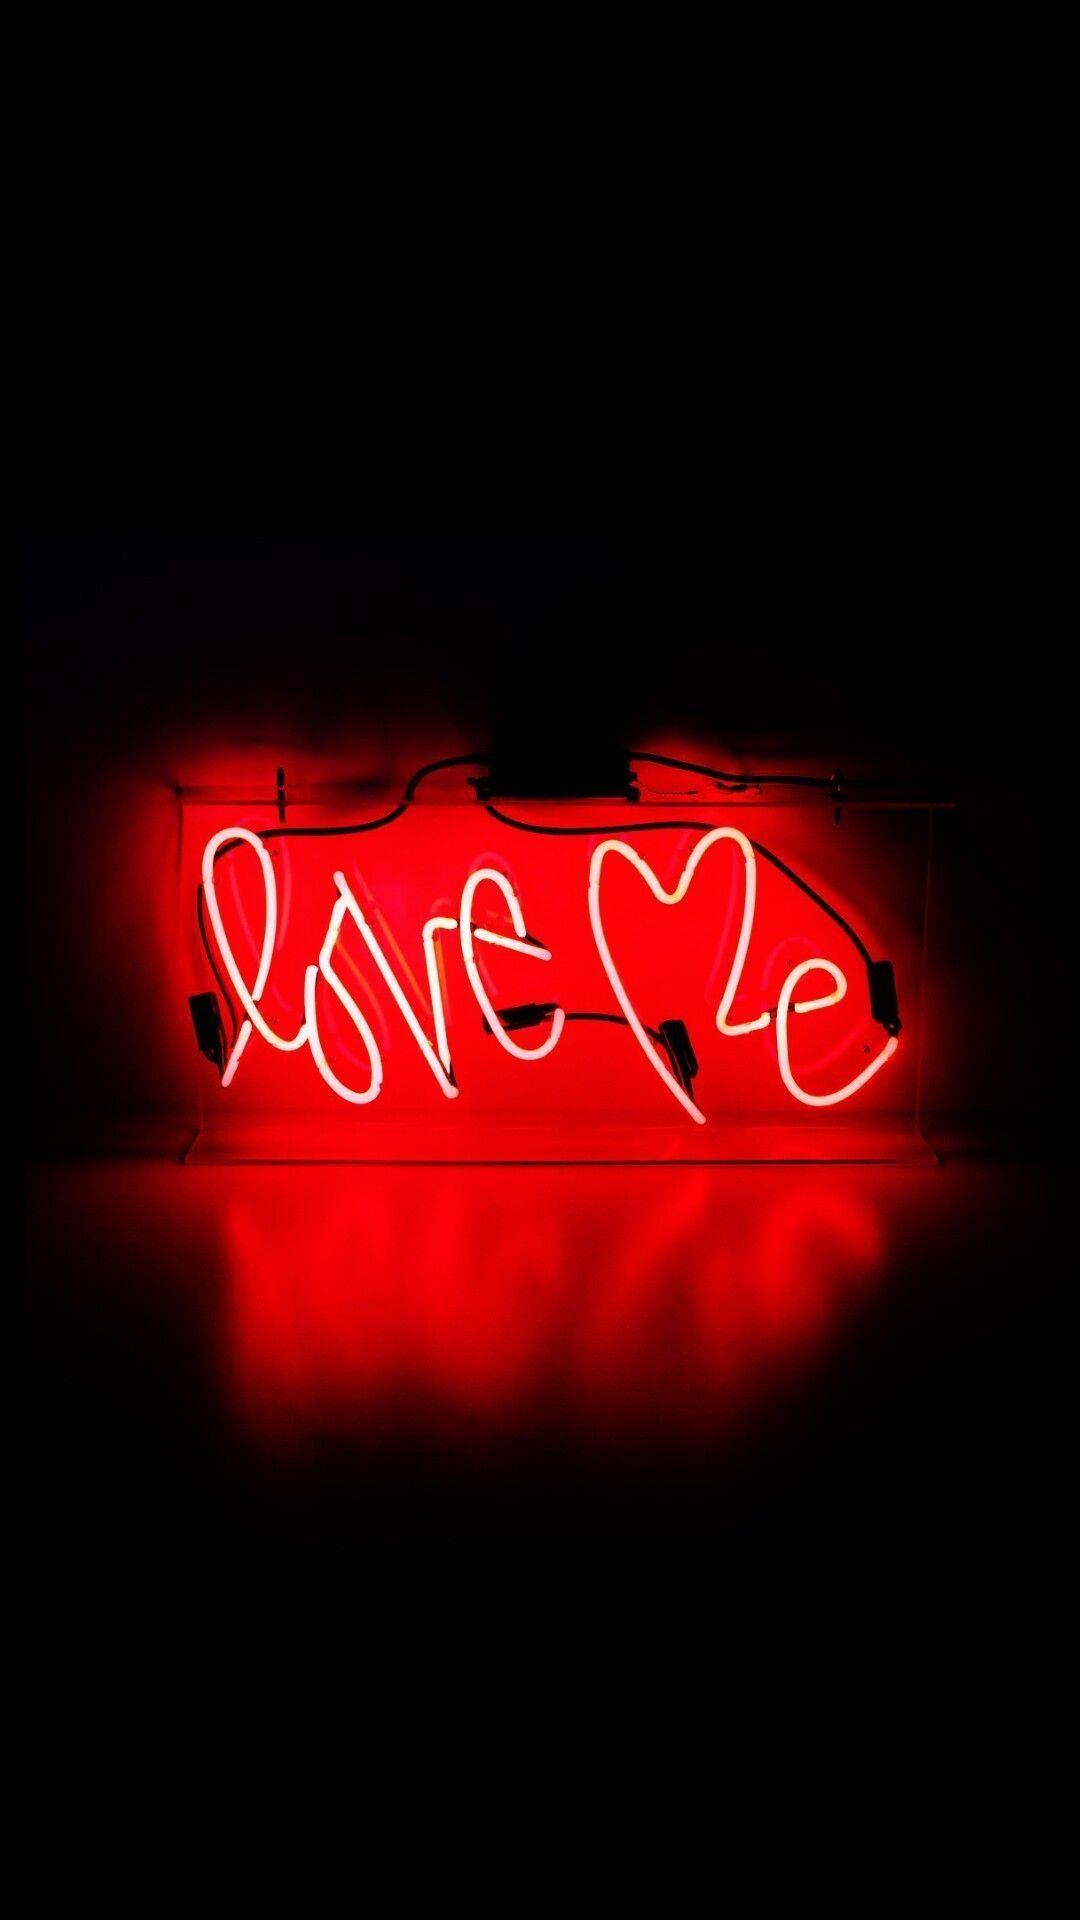 A neon sign that says love me - Dark red